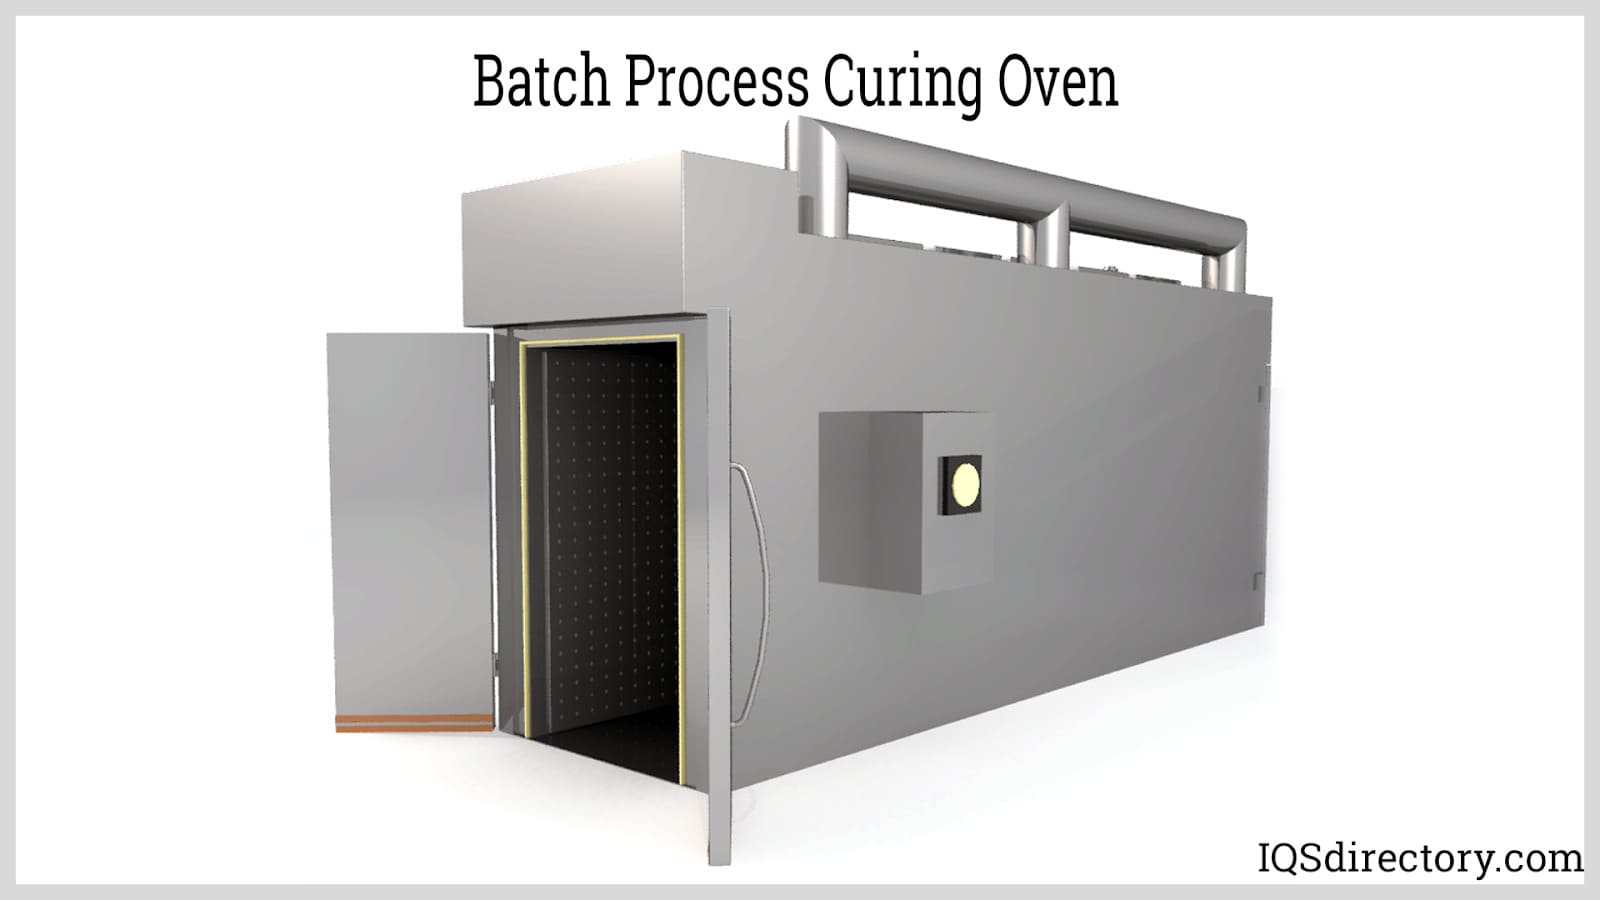 Batch Process Curing Oven